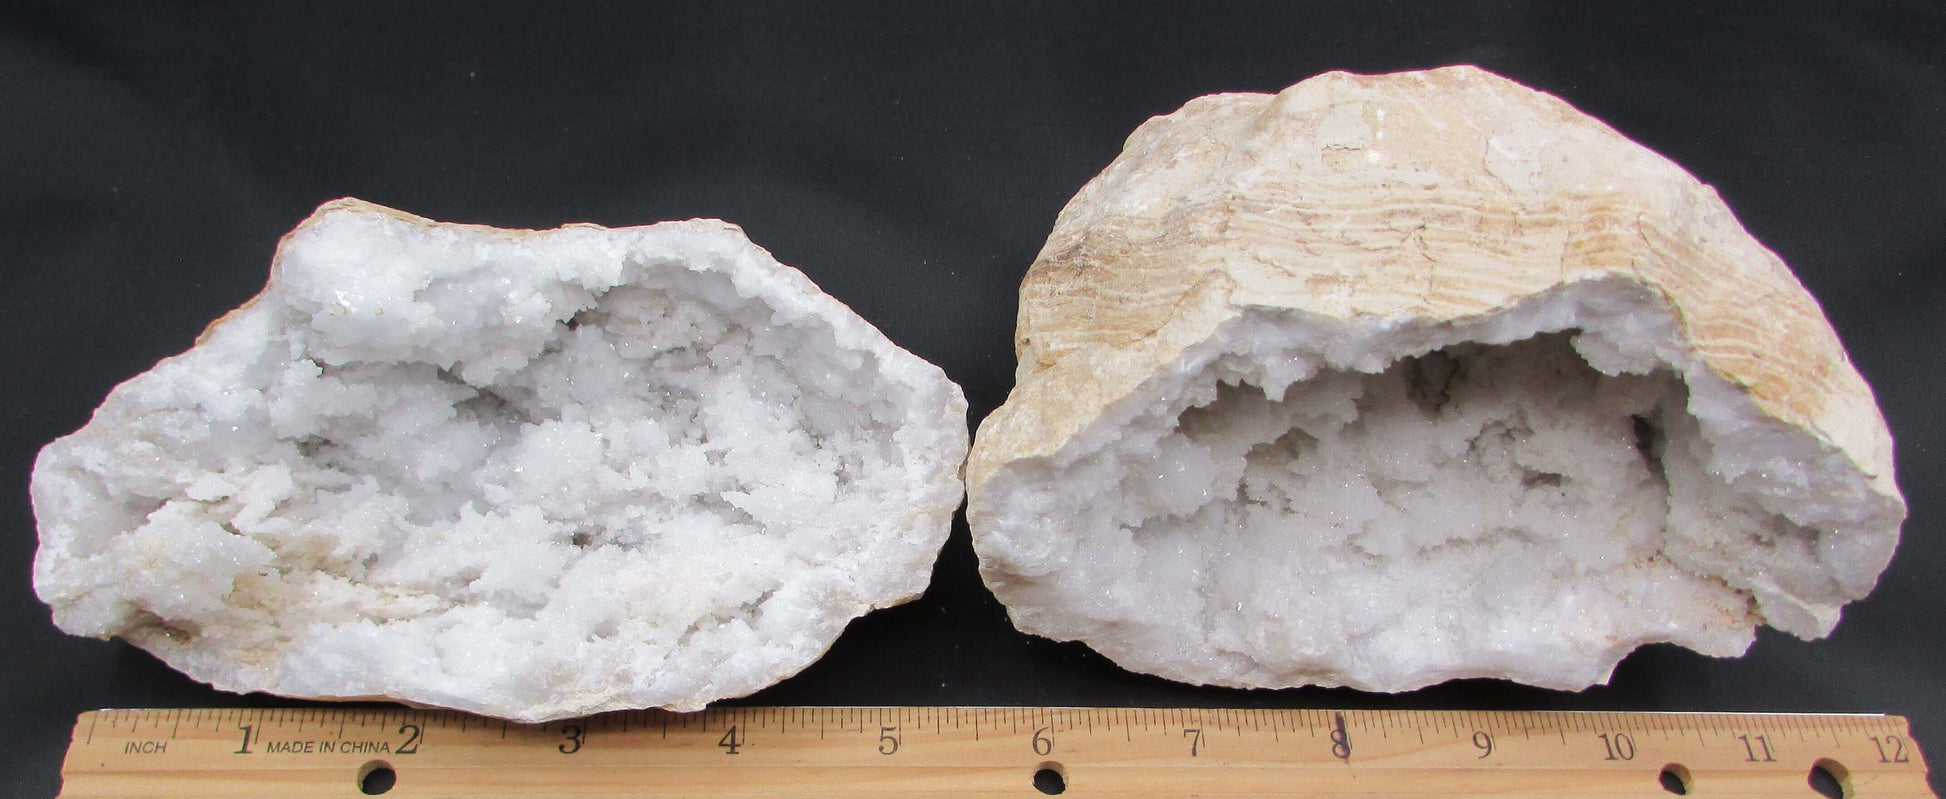 Moroccan Snow White Quartz Druzy Geode ethically sourced from morocco whole geode